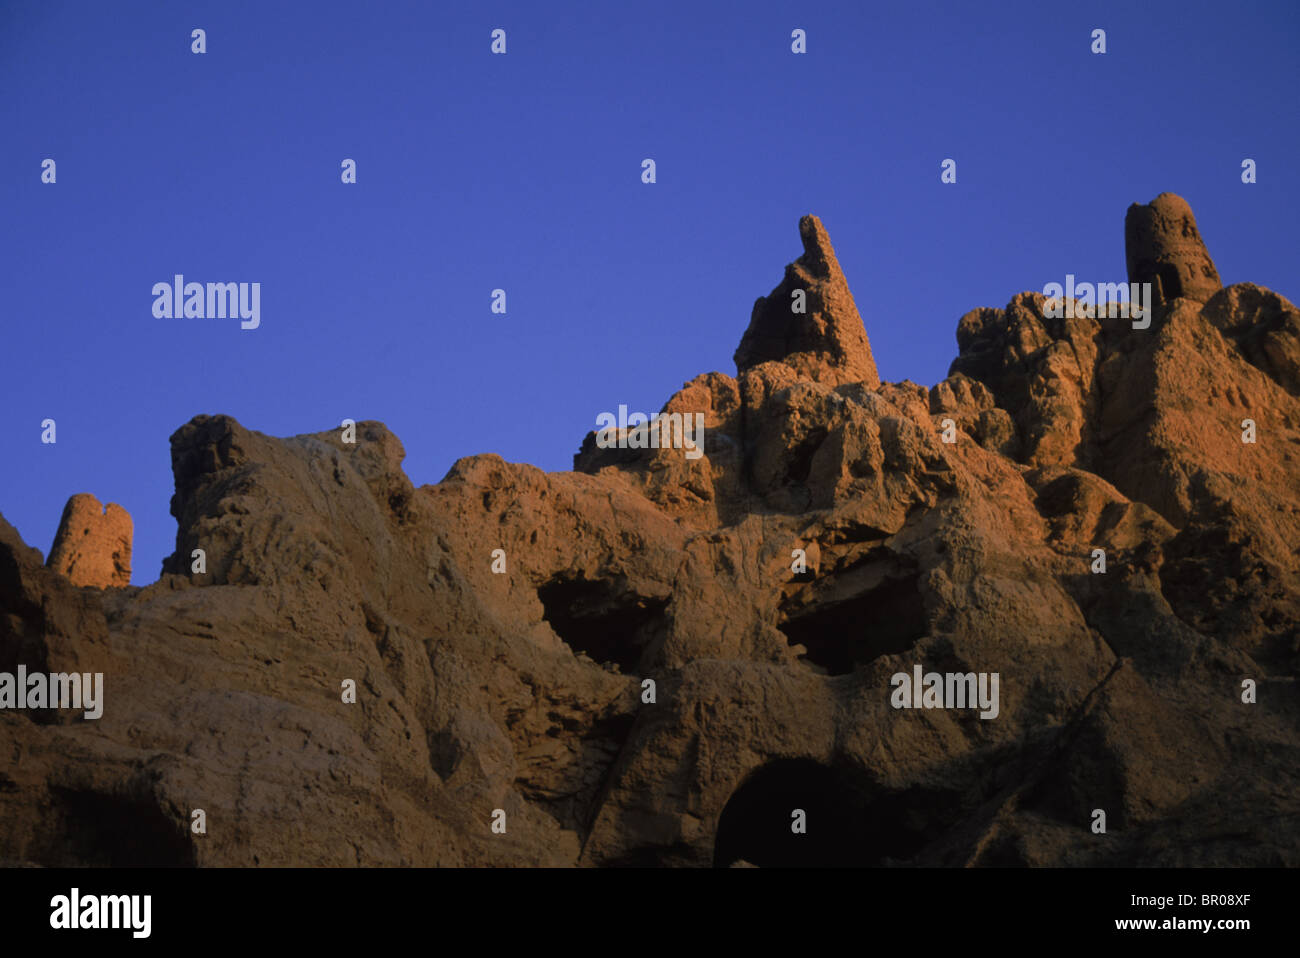 Round stone towers rise over the cliffs which once housed a famous Buddha and Buddhist monastary complex, Bamiyan Valley Stock Photo